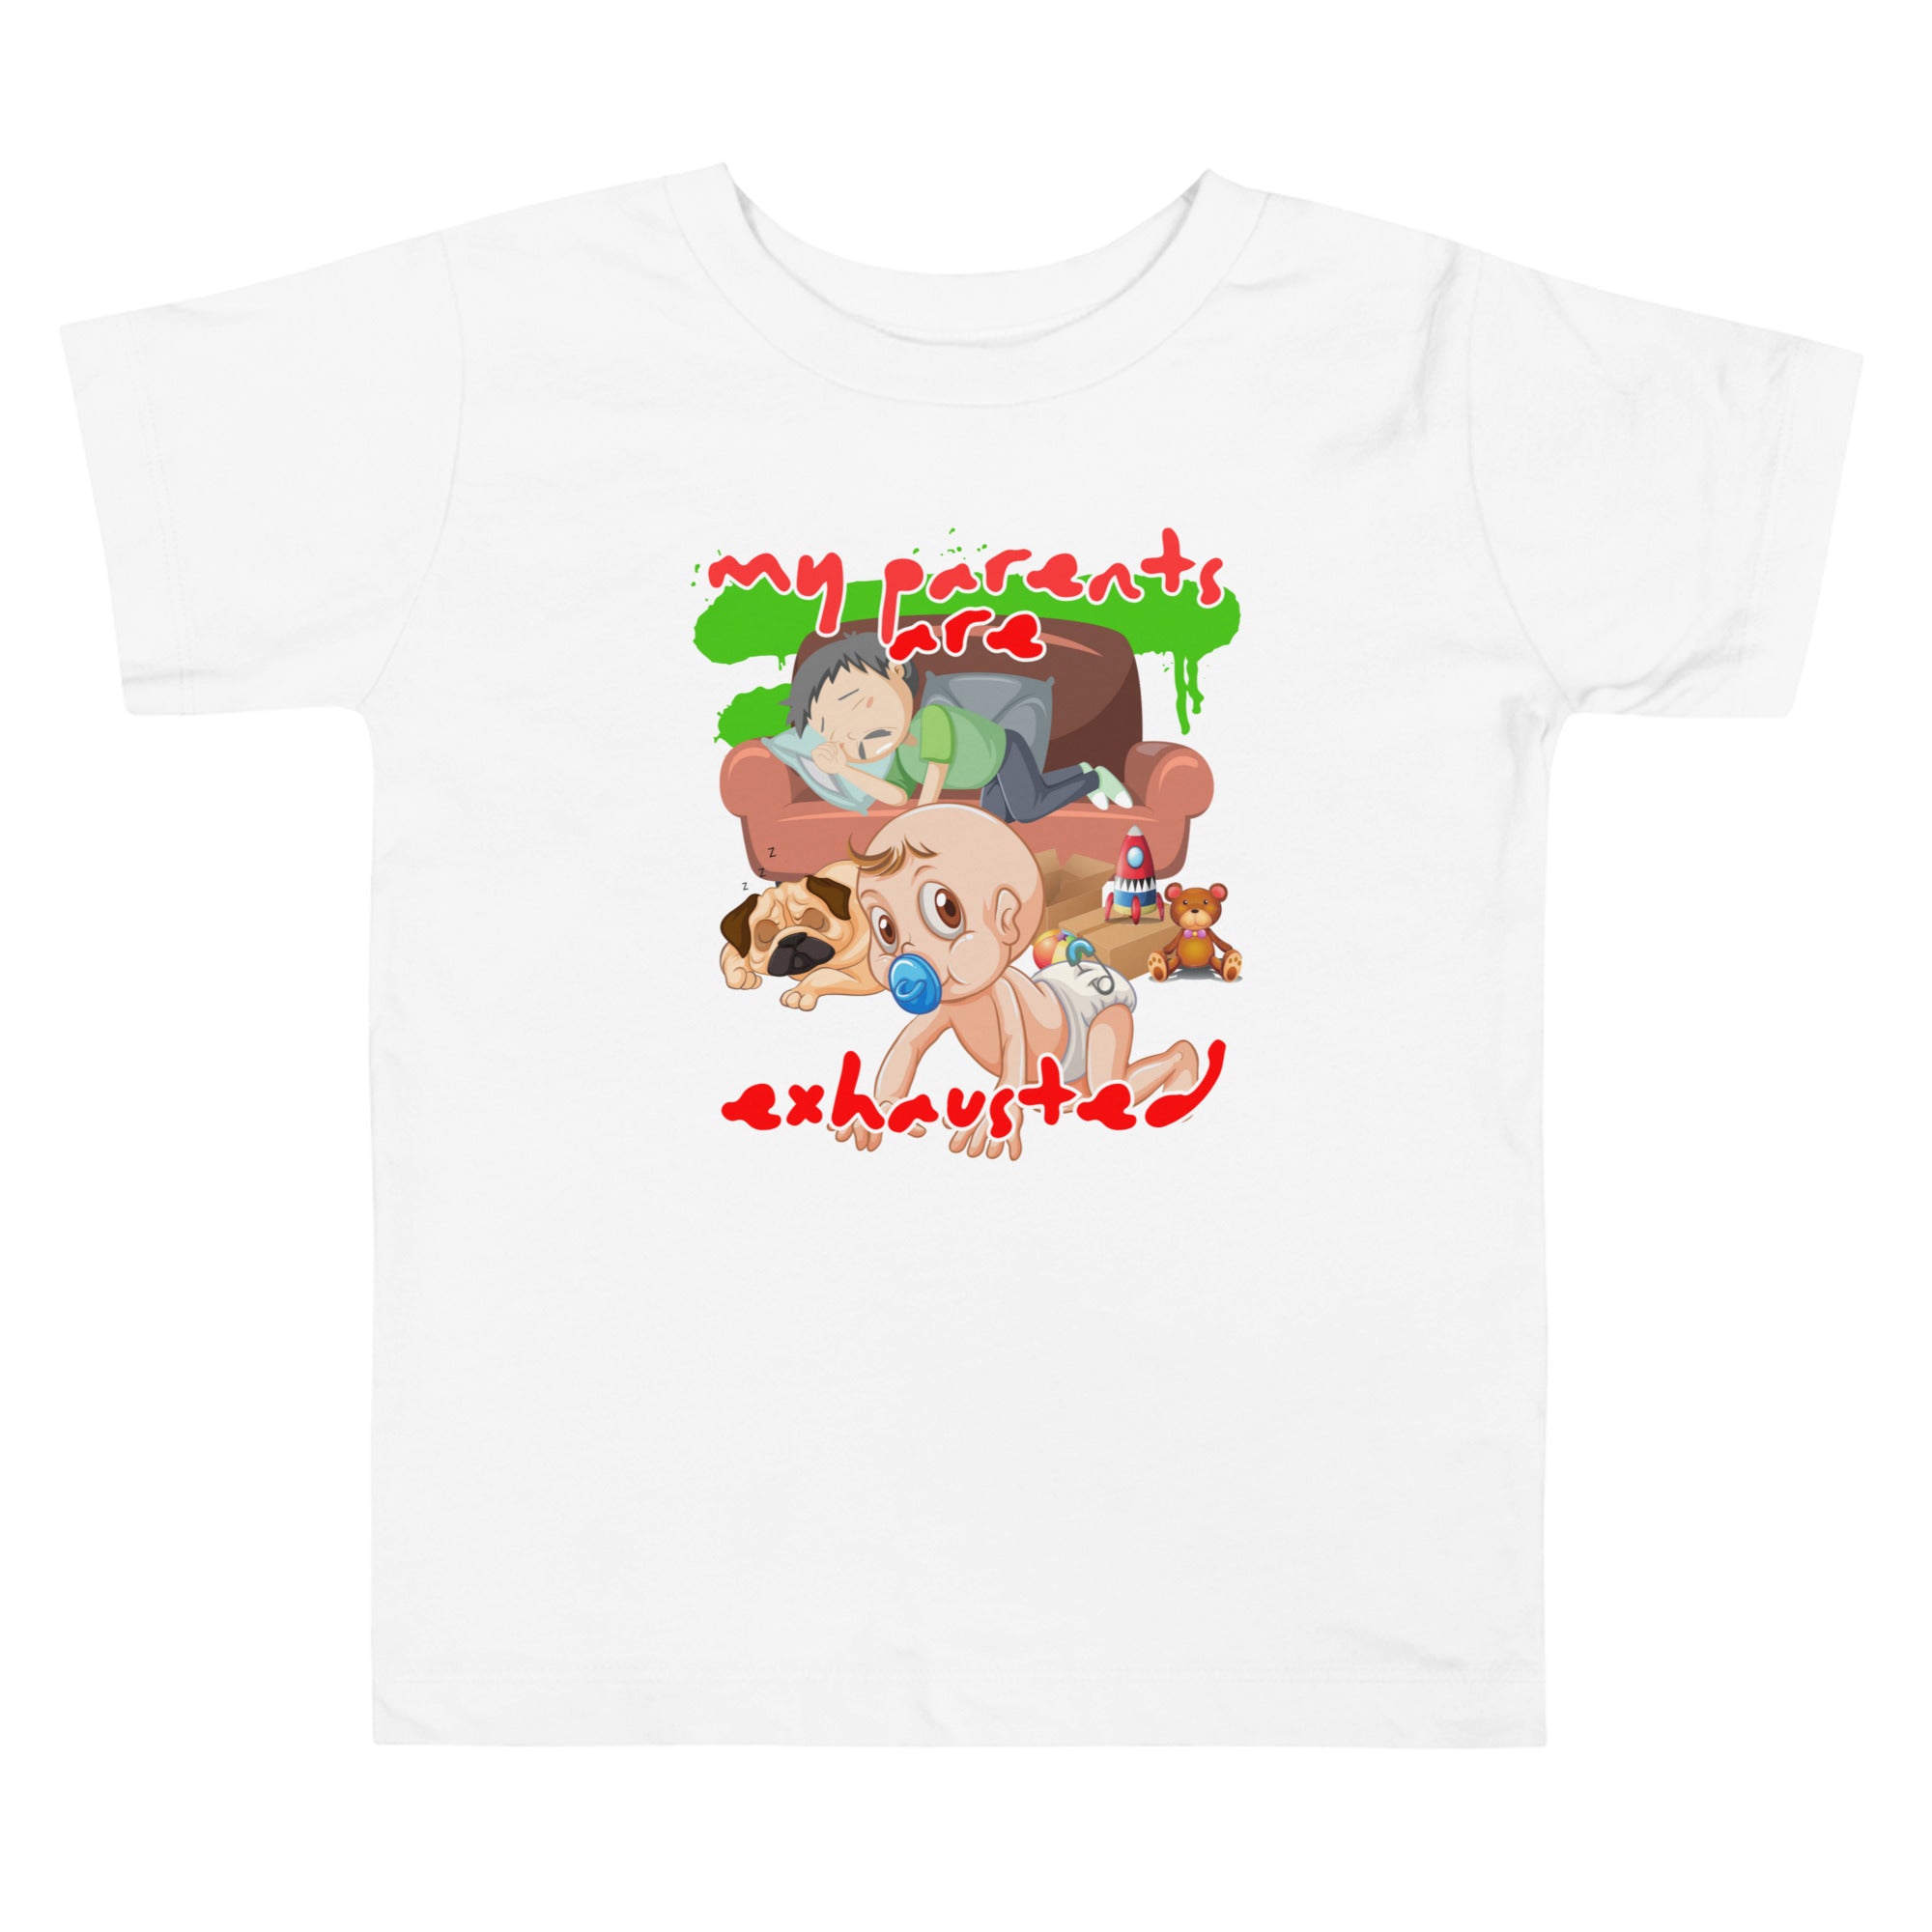 Toddler Short Sleeve Tee - Exhausted (White)